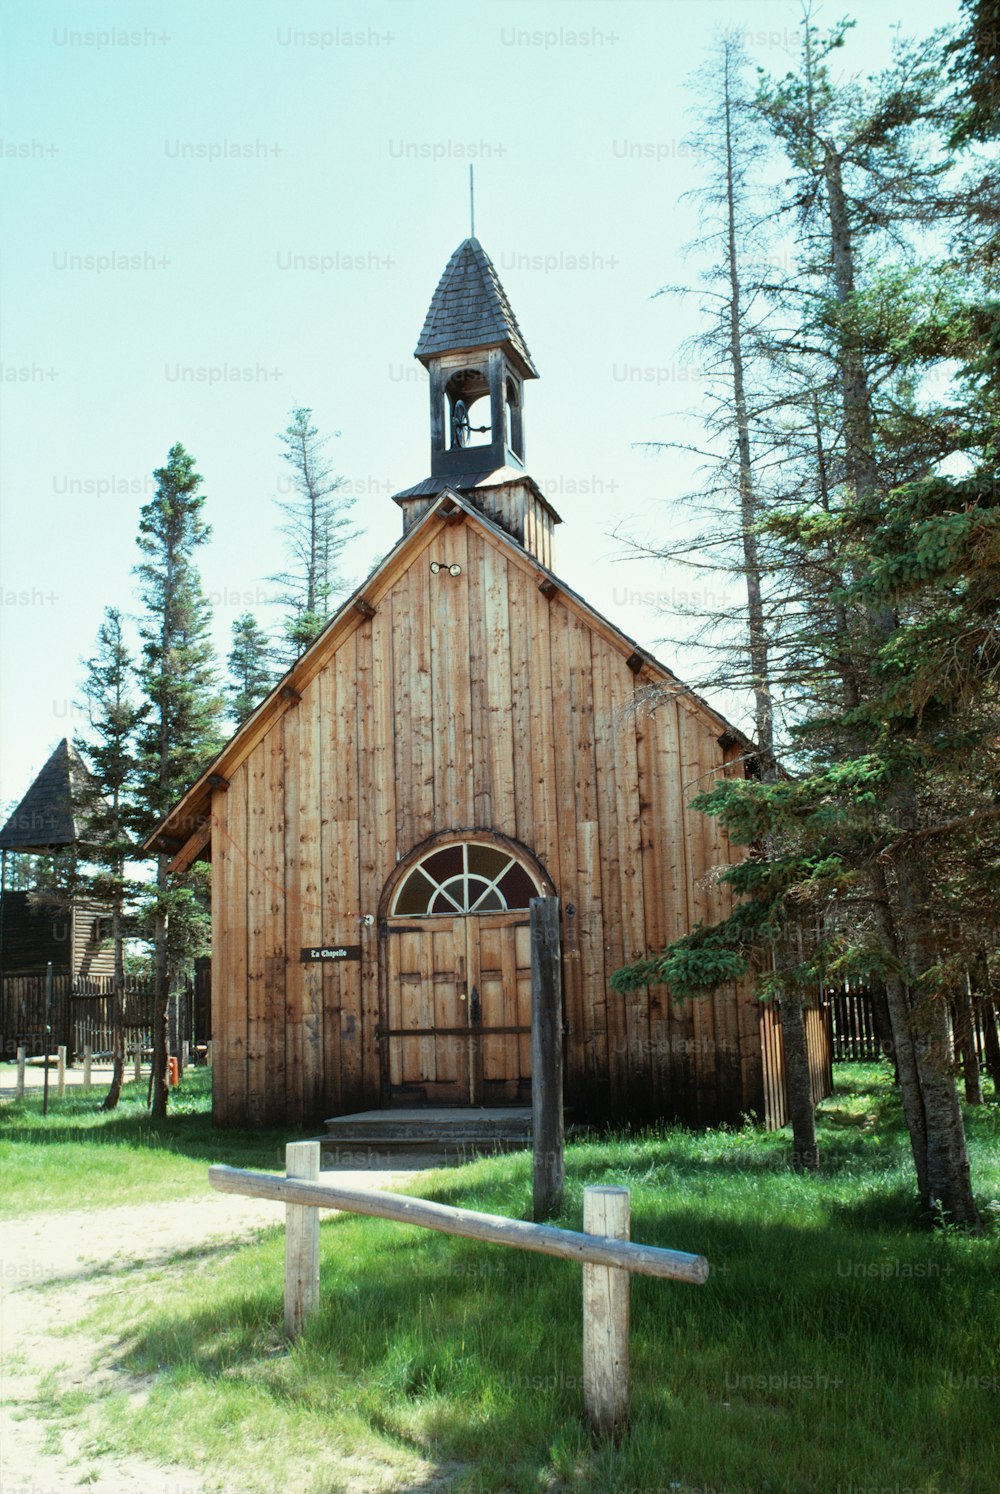 a wooden church with a steeple and a clock tower